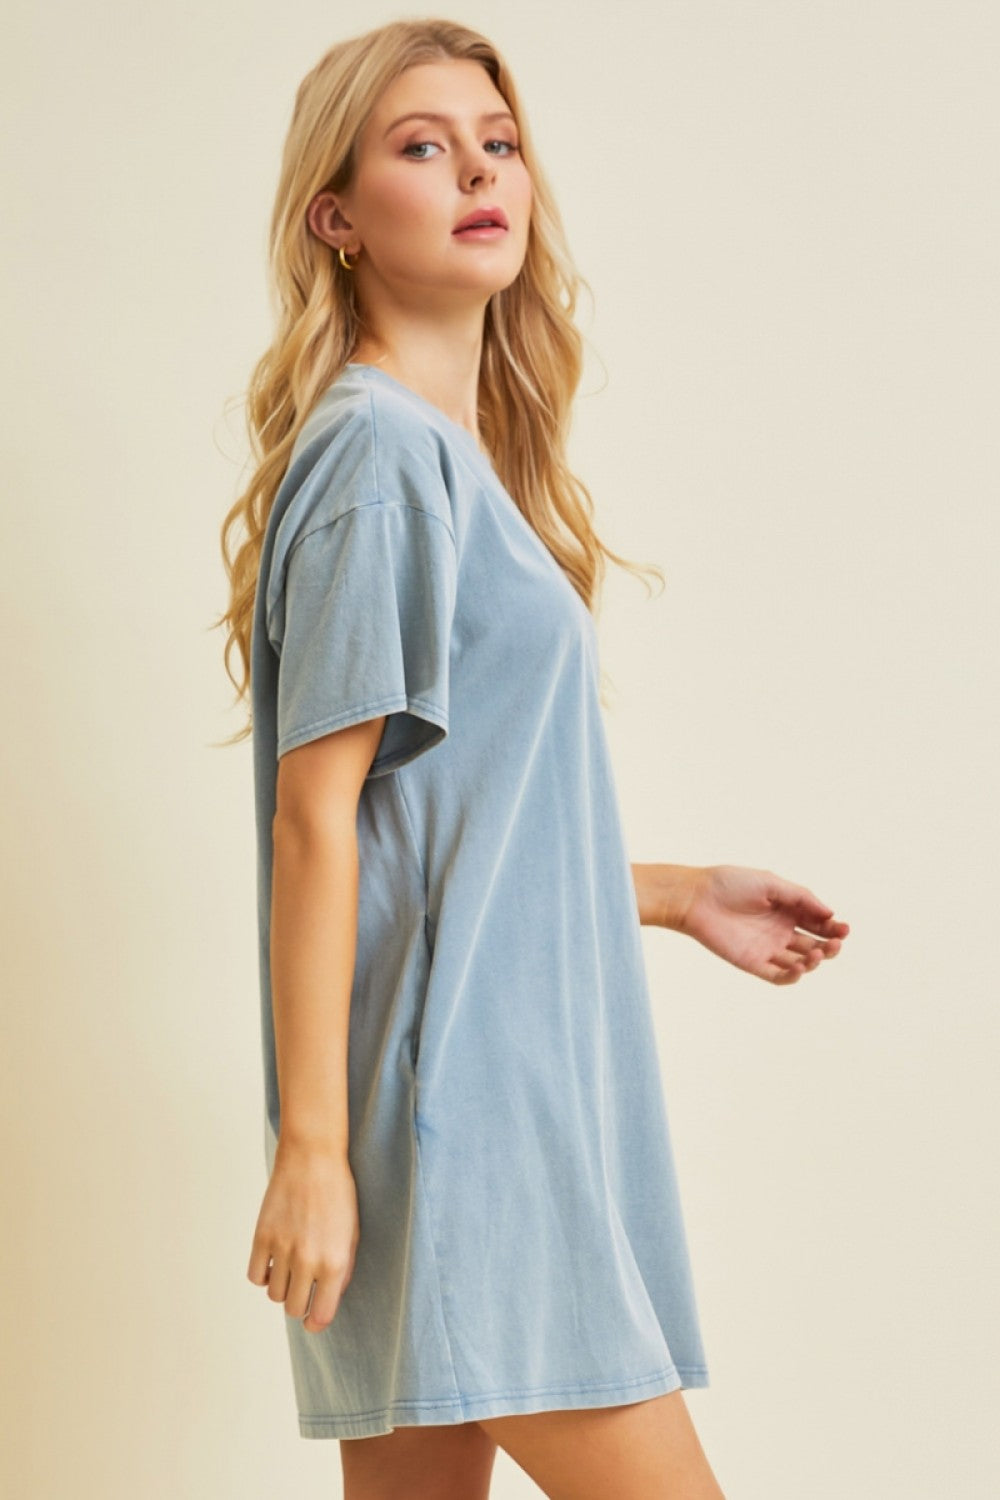 Perfection To A Tee T-Shirt Dress